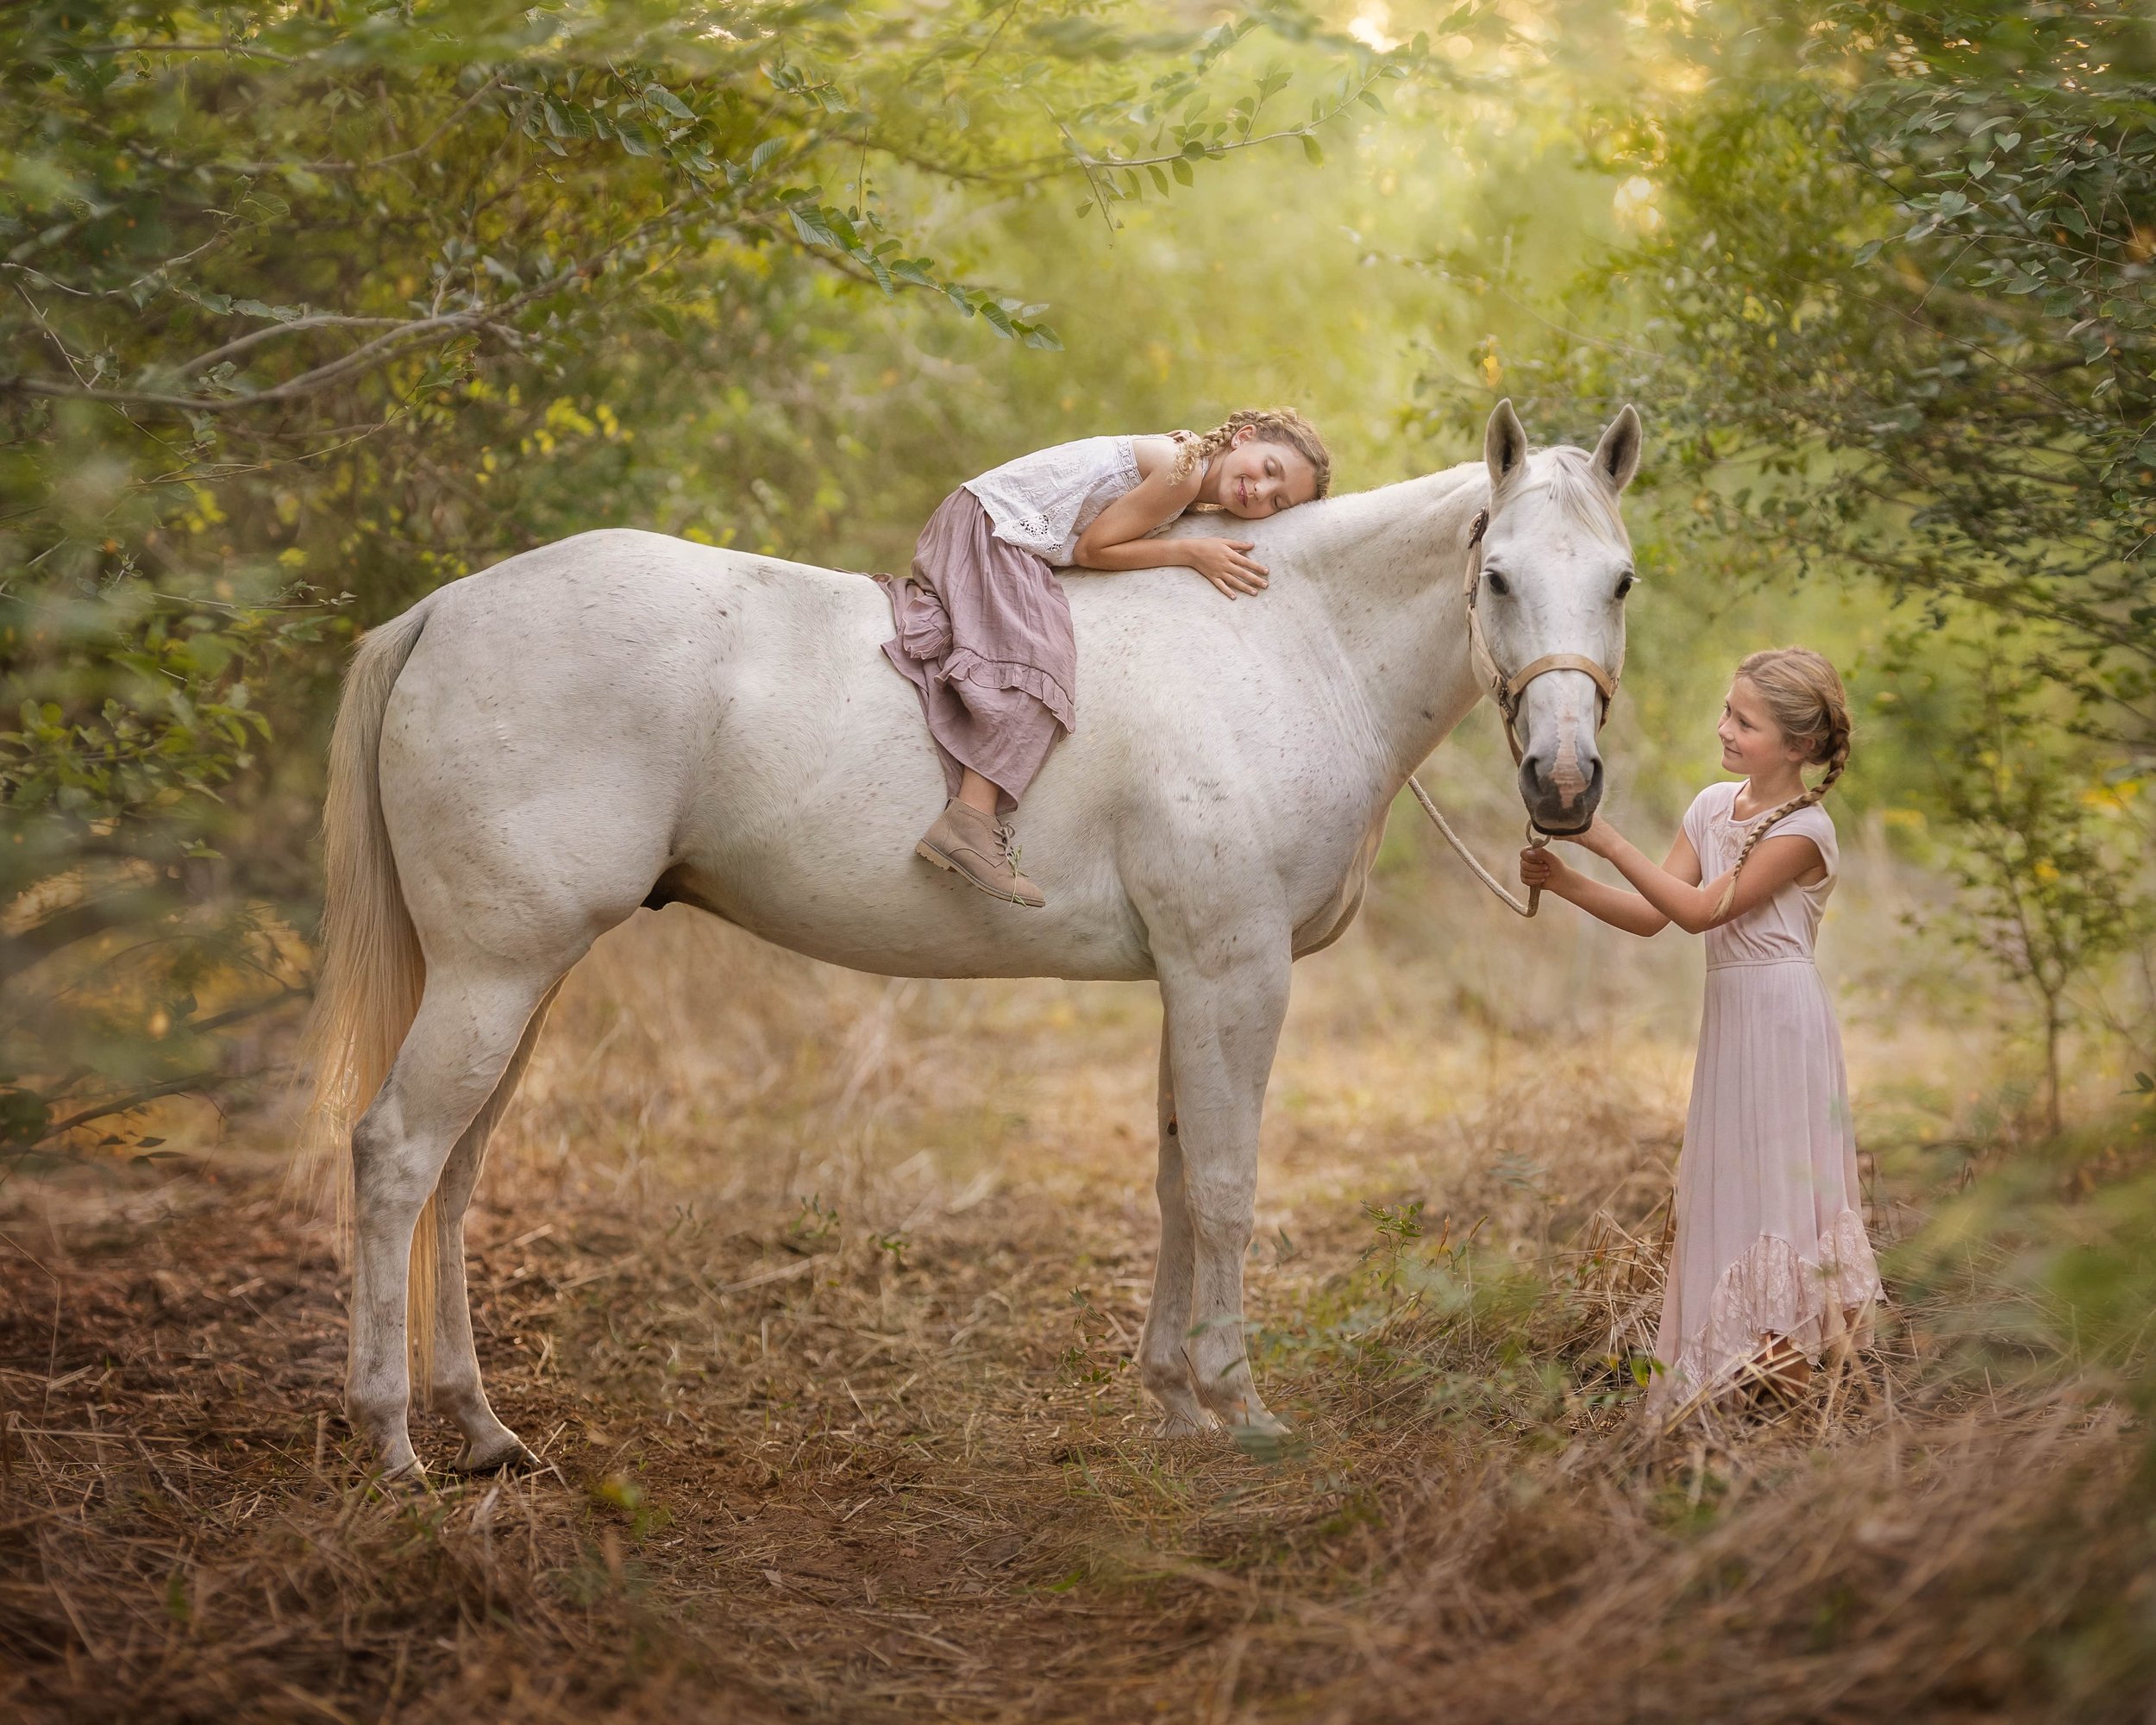 Angie Perisse - Portfolio - Magical Childhood- Photography Session for Kids, Pets, Horses, Family and Studio in Vernon, Texas, USA.